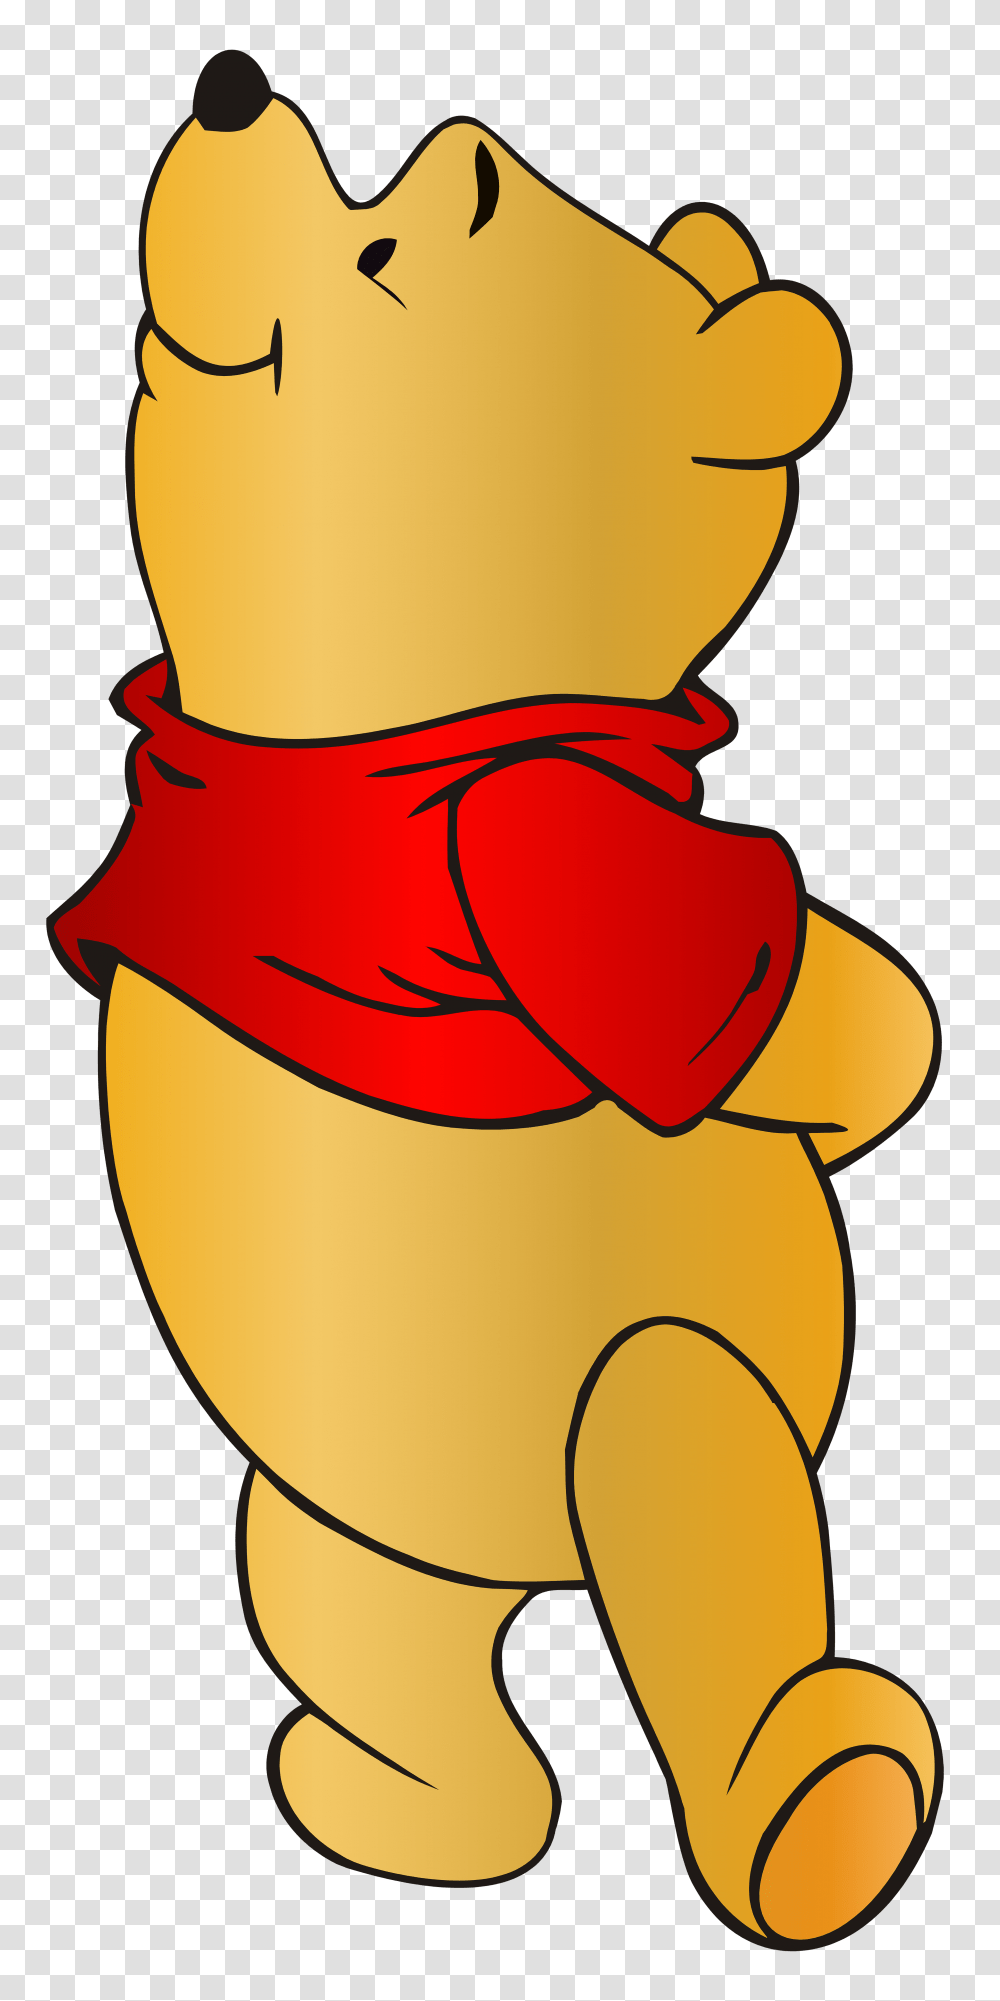 Classic Winnie The Pooh Tree Clipart Clip Art Images, Apparel, Tie, Accessories Transparent Png